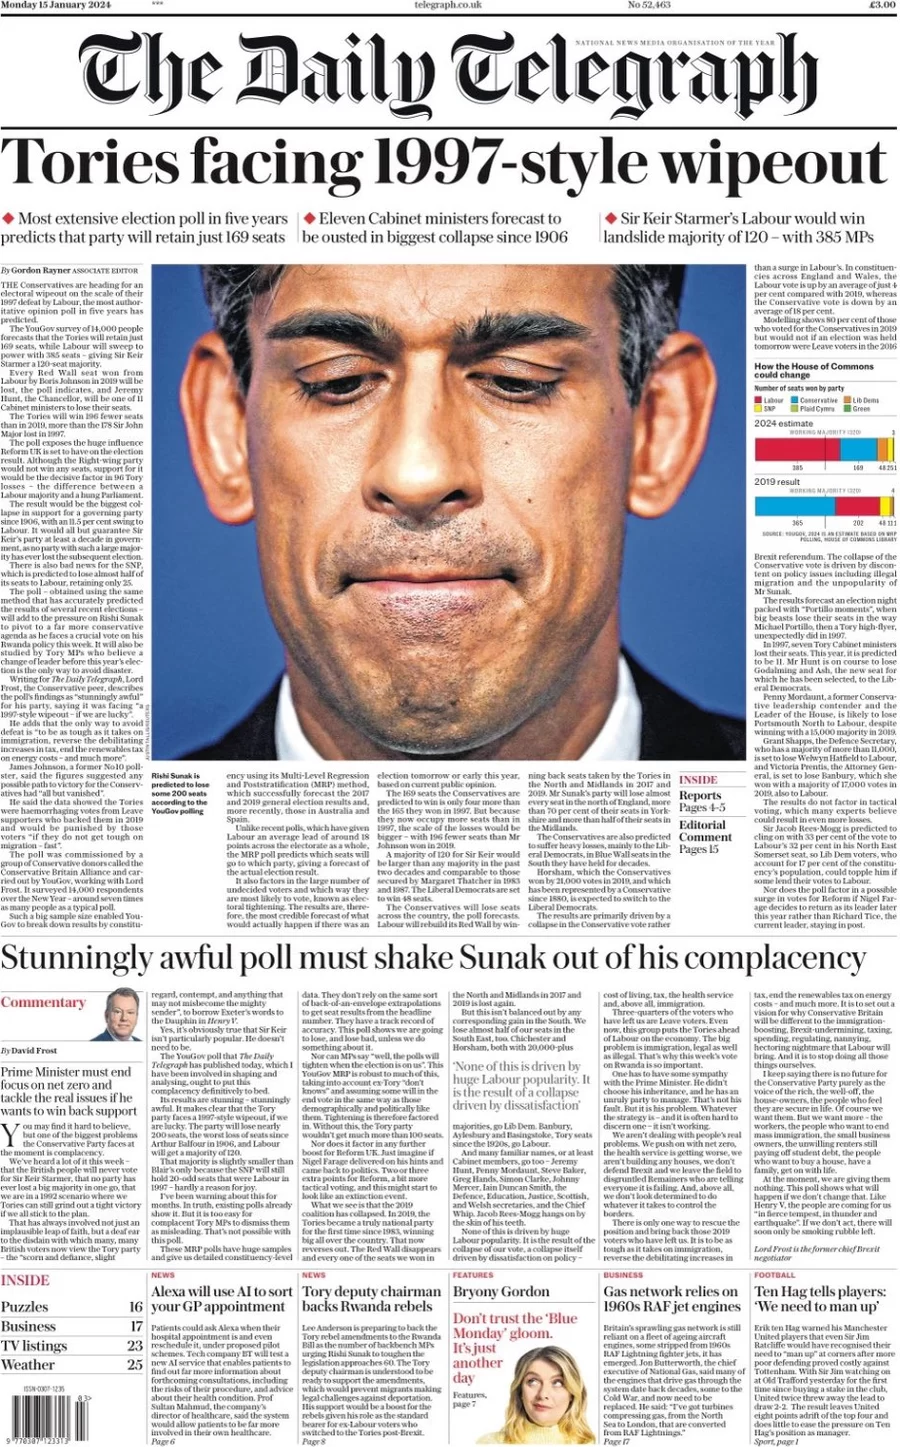 The Daily Telegraph - Tories facing 1997-style wipeout